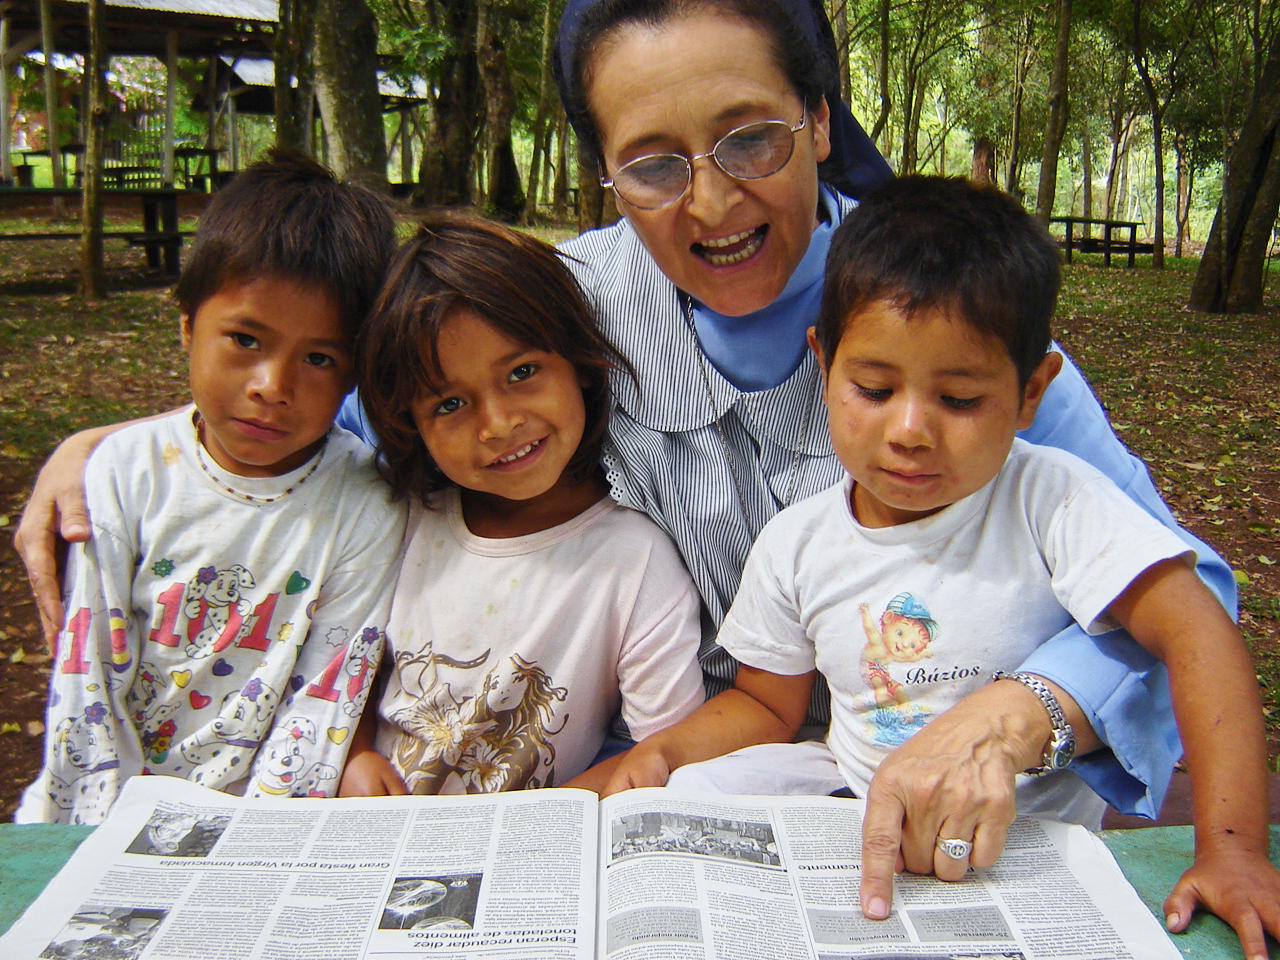 SSpS Sister and indigenous children, in Bilingual School, in Misiones Argentina